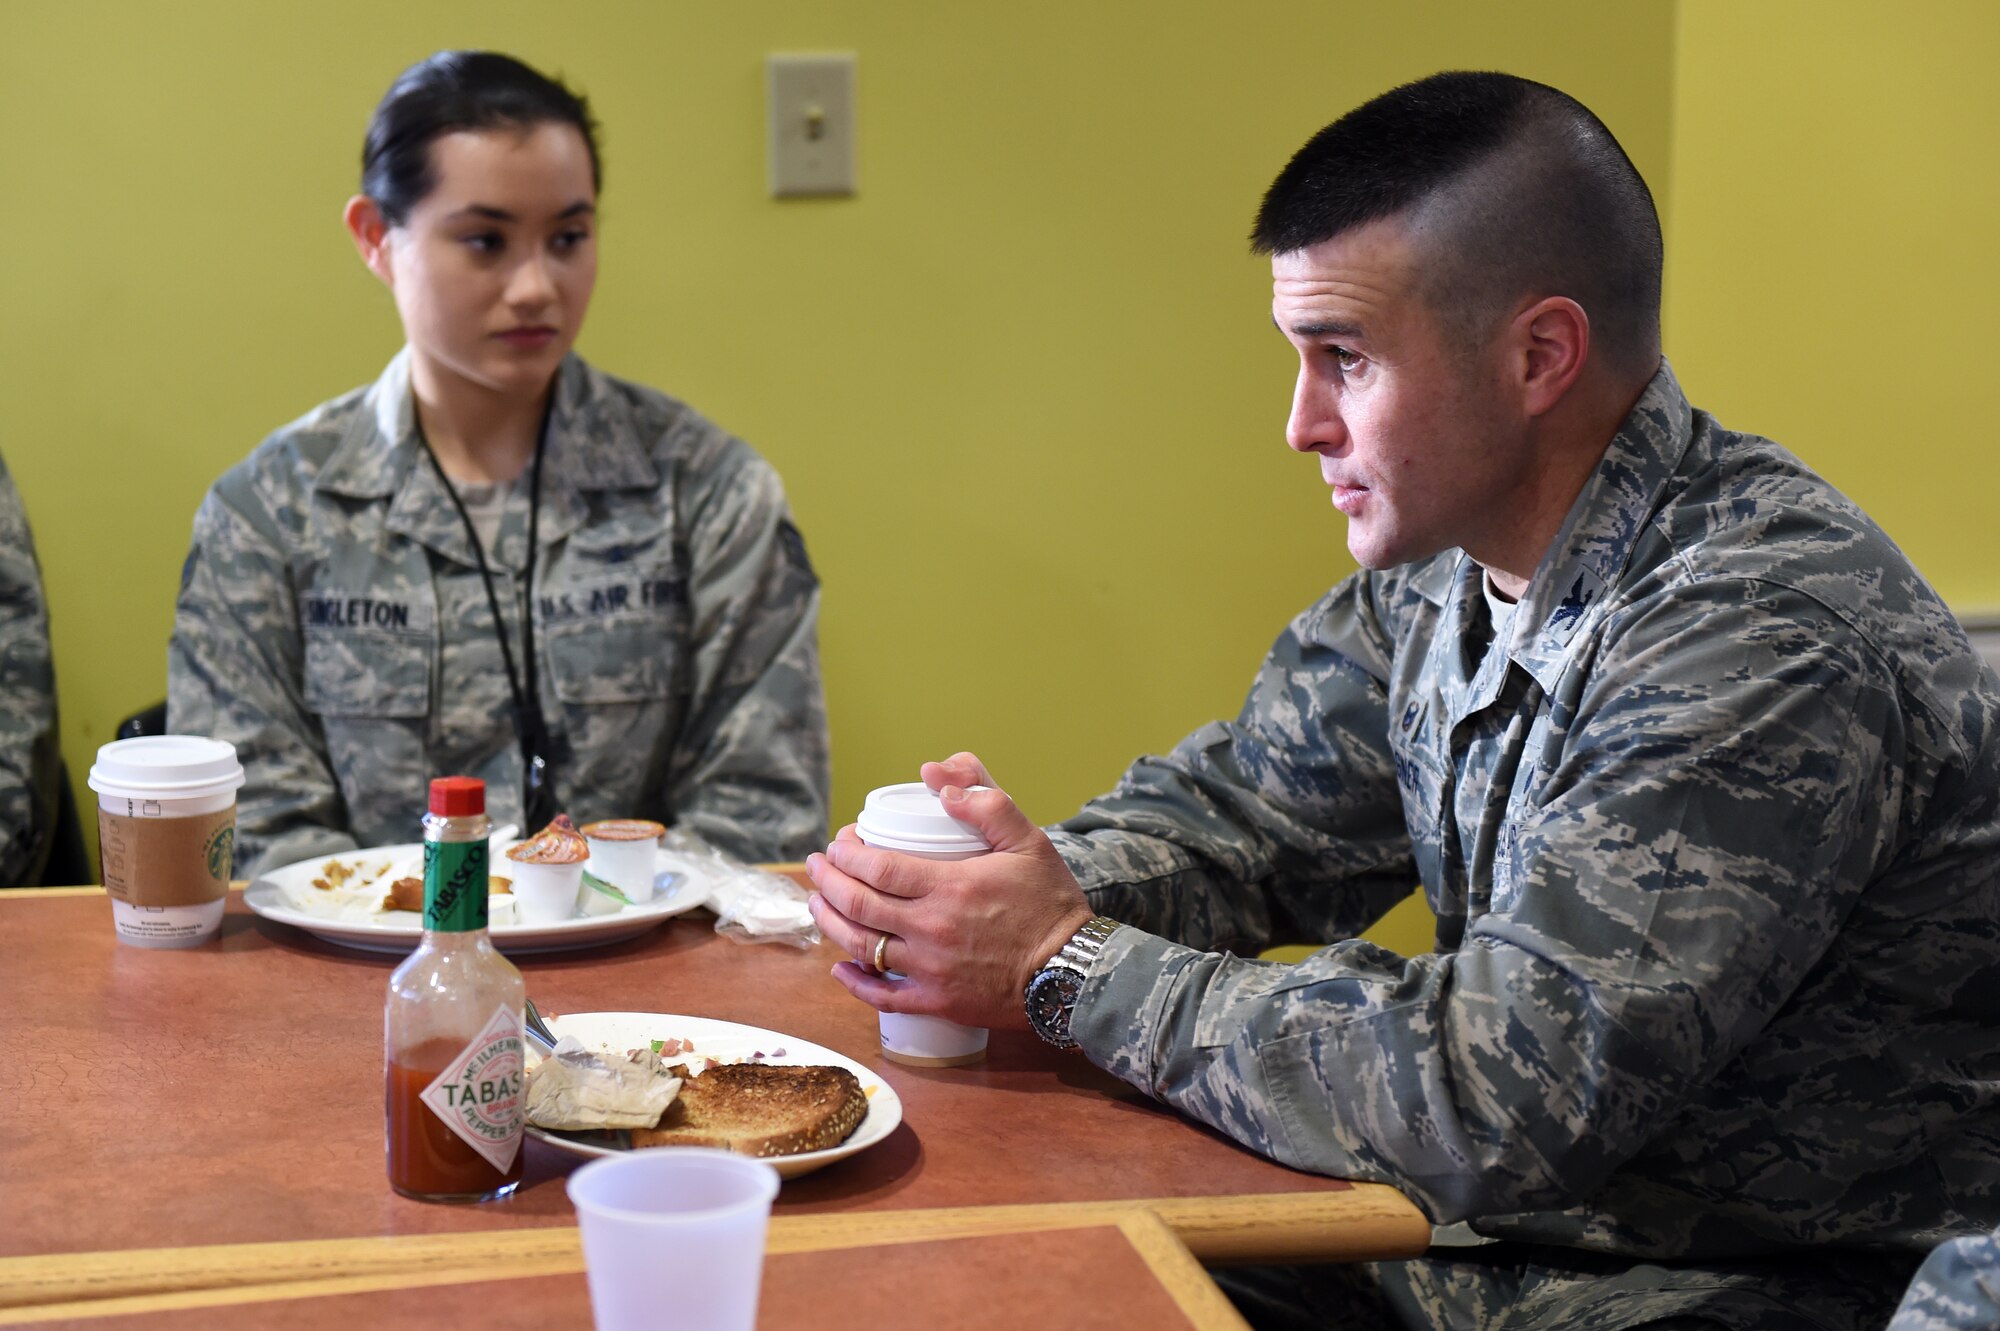 Col. John Wagner, 460th Space Wing commander, right, speaks with Airmen during a breakfast with leadership Jan. 9, 2015, at the Panther Den on Buckley Air Force Base, Colo. During the breakfast, leadership sought out Airmen’s thoughts and opinions on what they could do to make Buckley the best base in the Air Force. (U.S. Air Force photo by Airman 1st Class Emily E. Amyotte/Released)